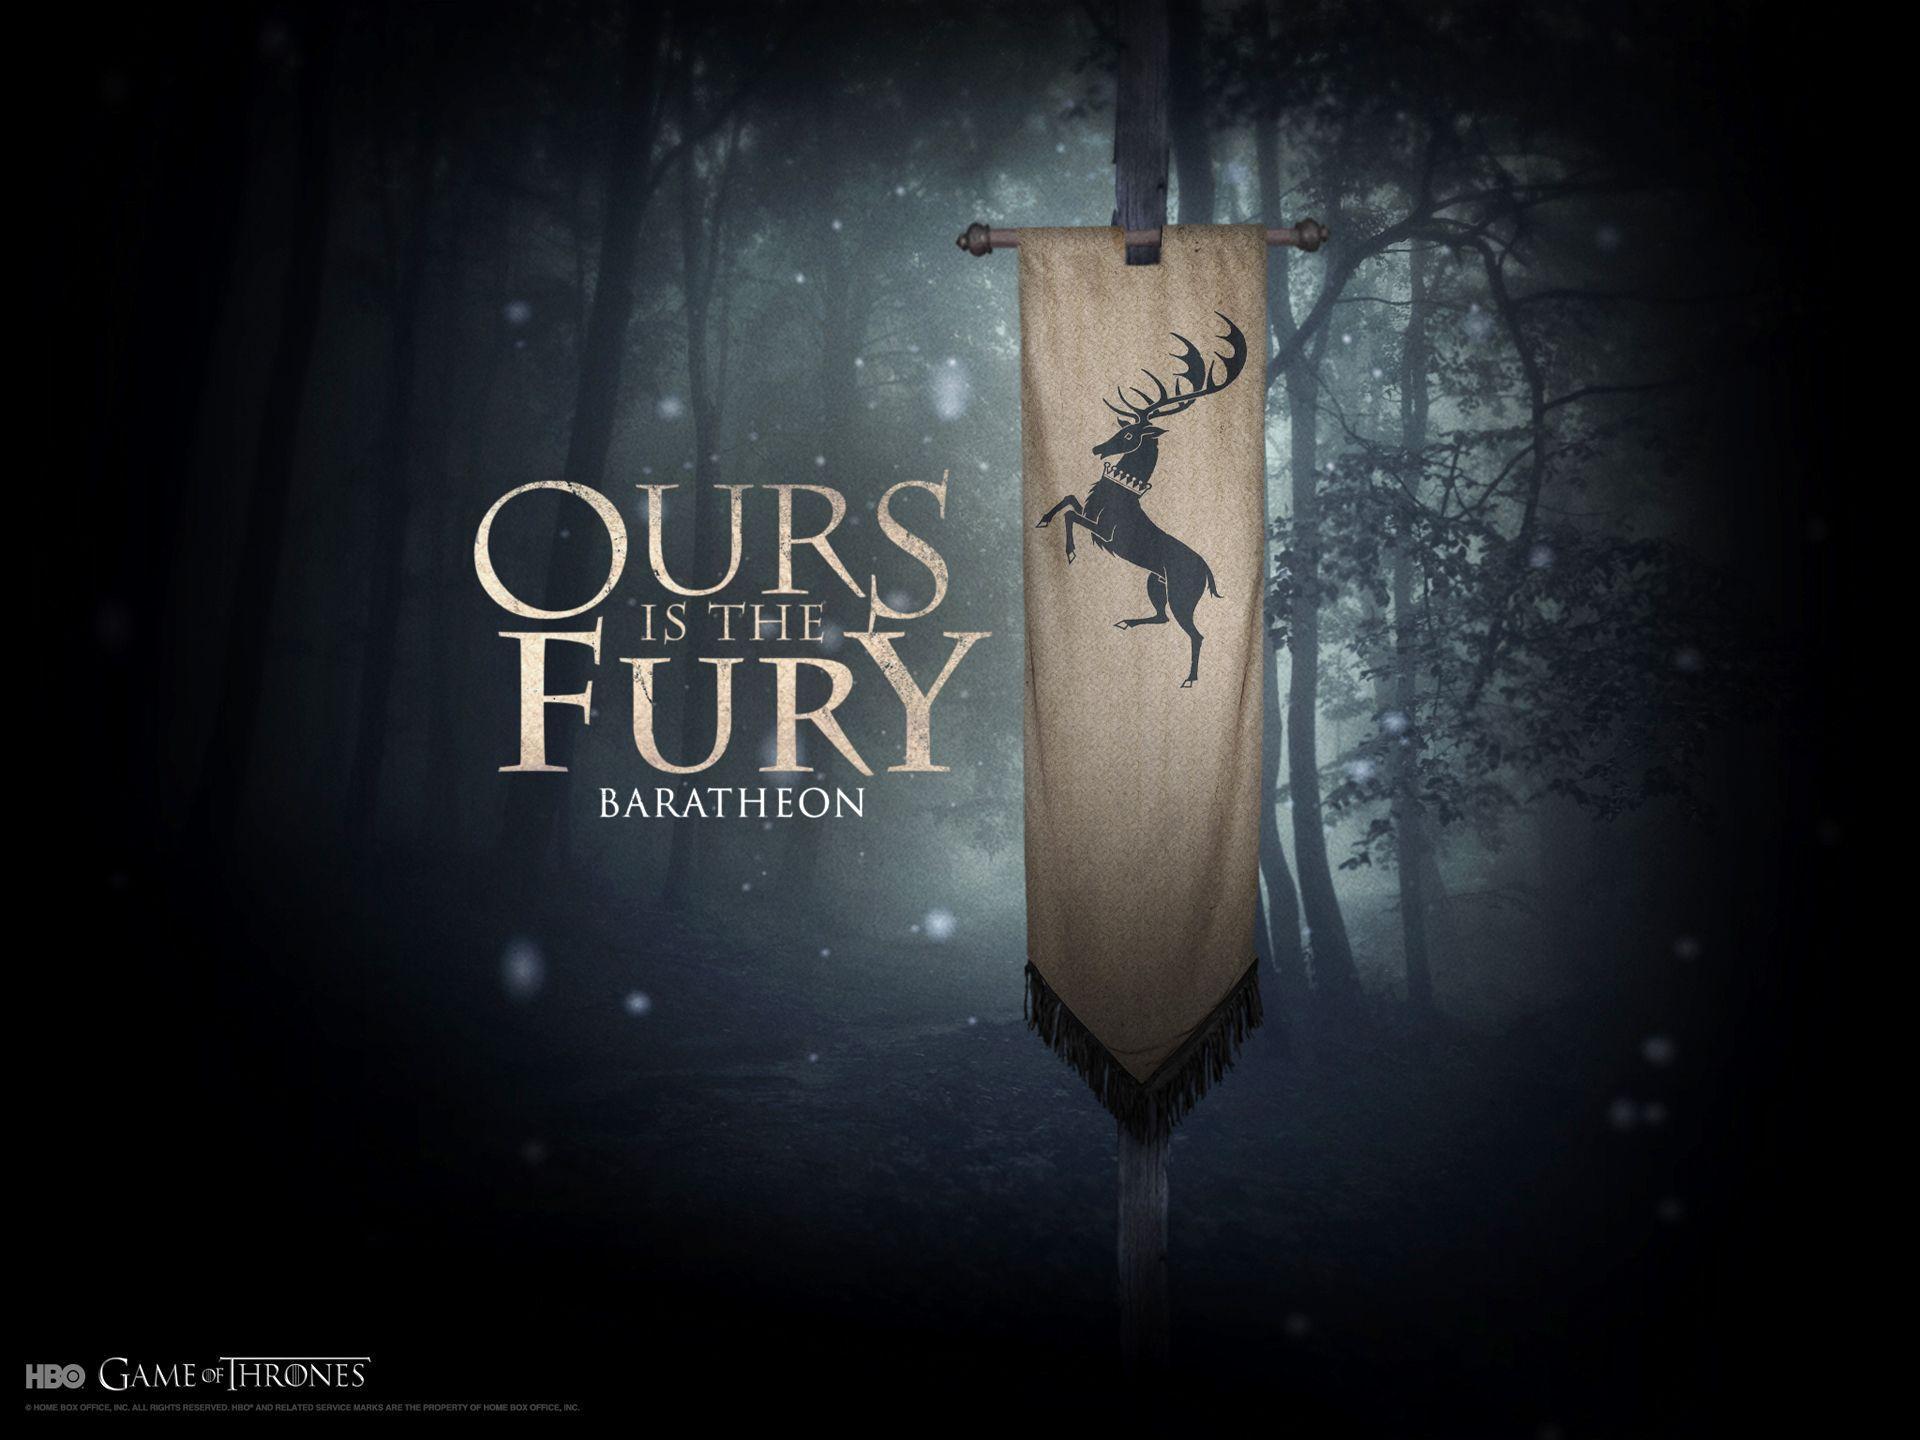 image about Game of thrones Wallpaper. Tv